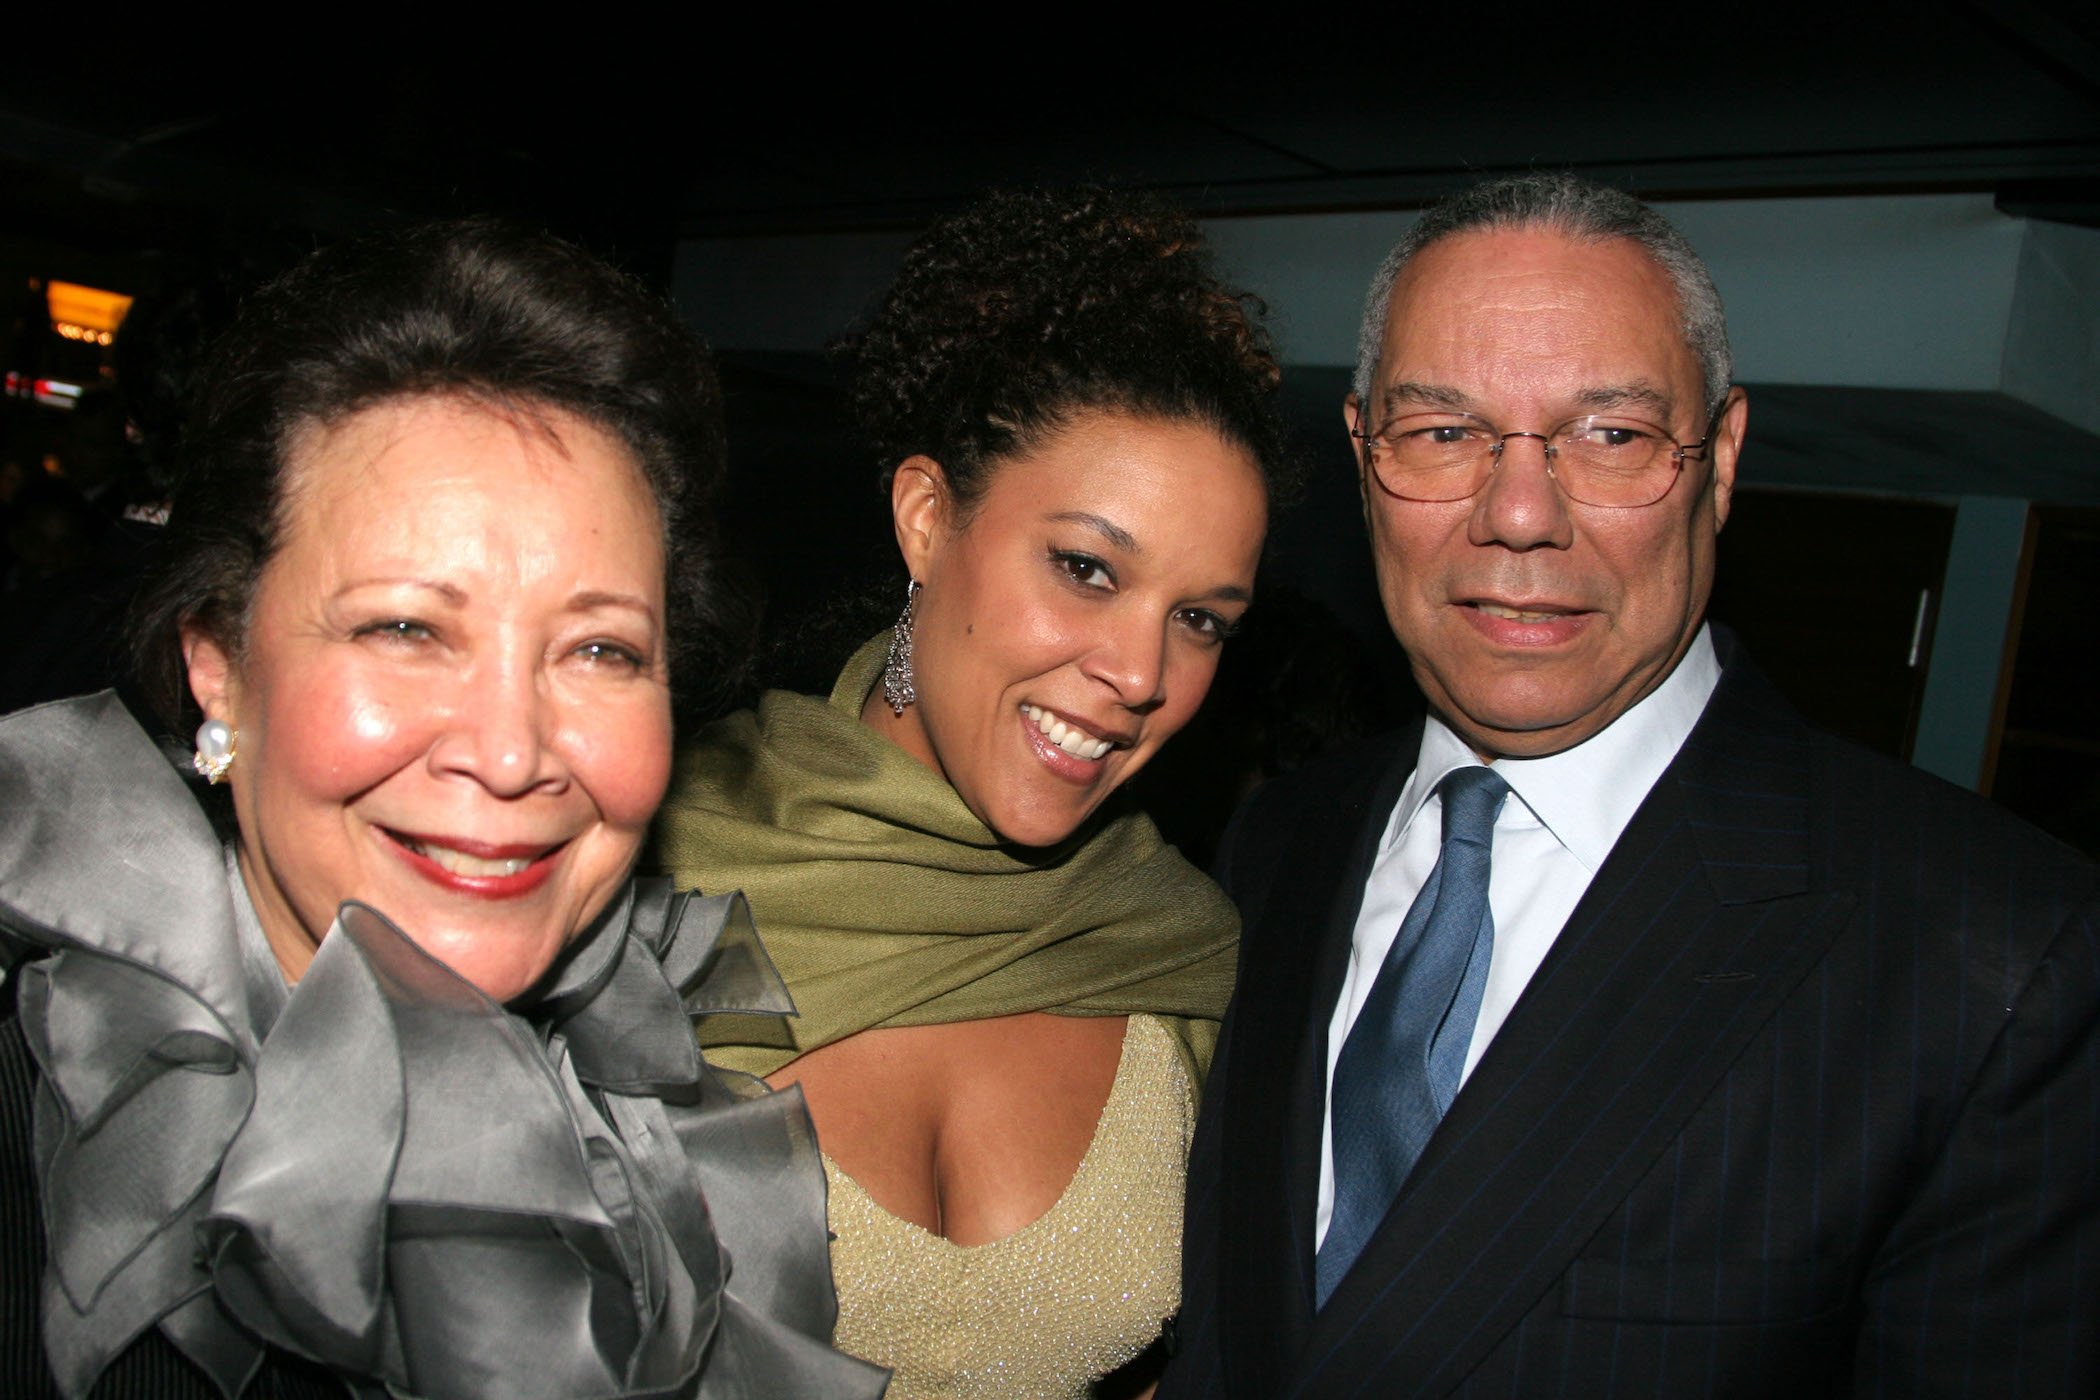 Colin Powell's wife, Alma Powell, and one of Colin Powell's children, Linda Powell, with Colin Powell at an event